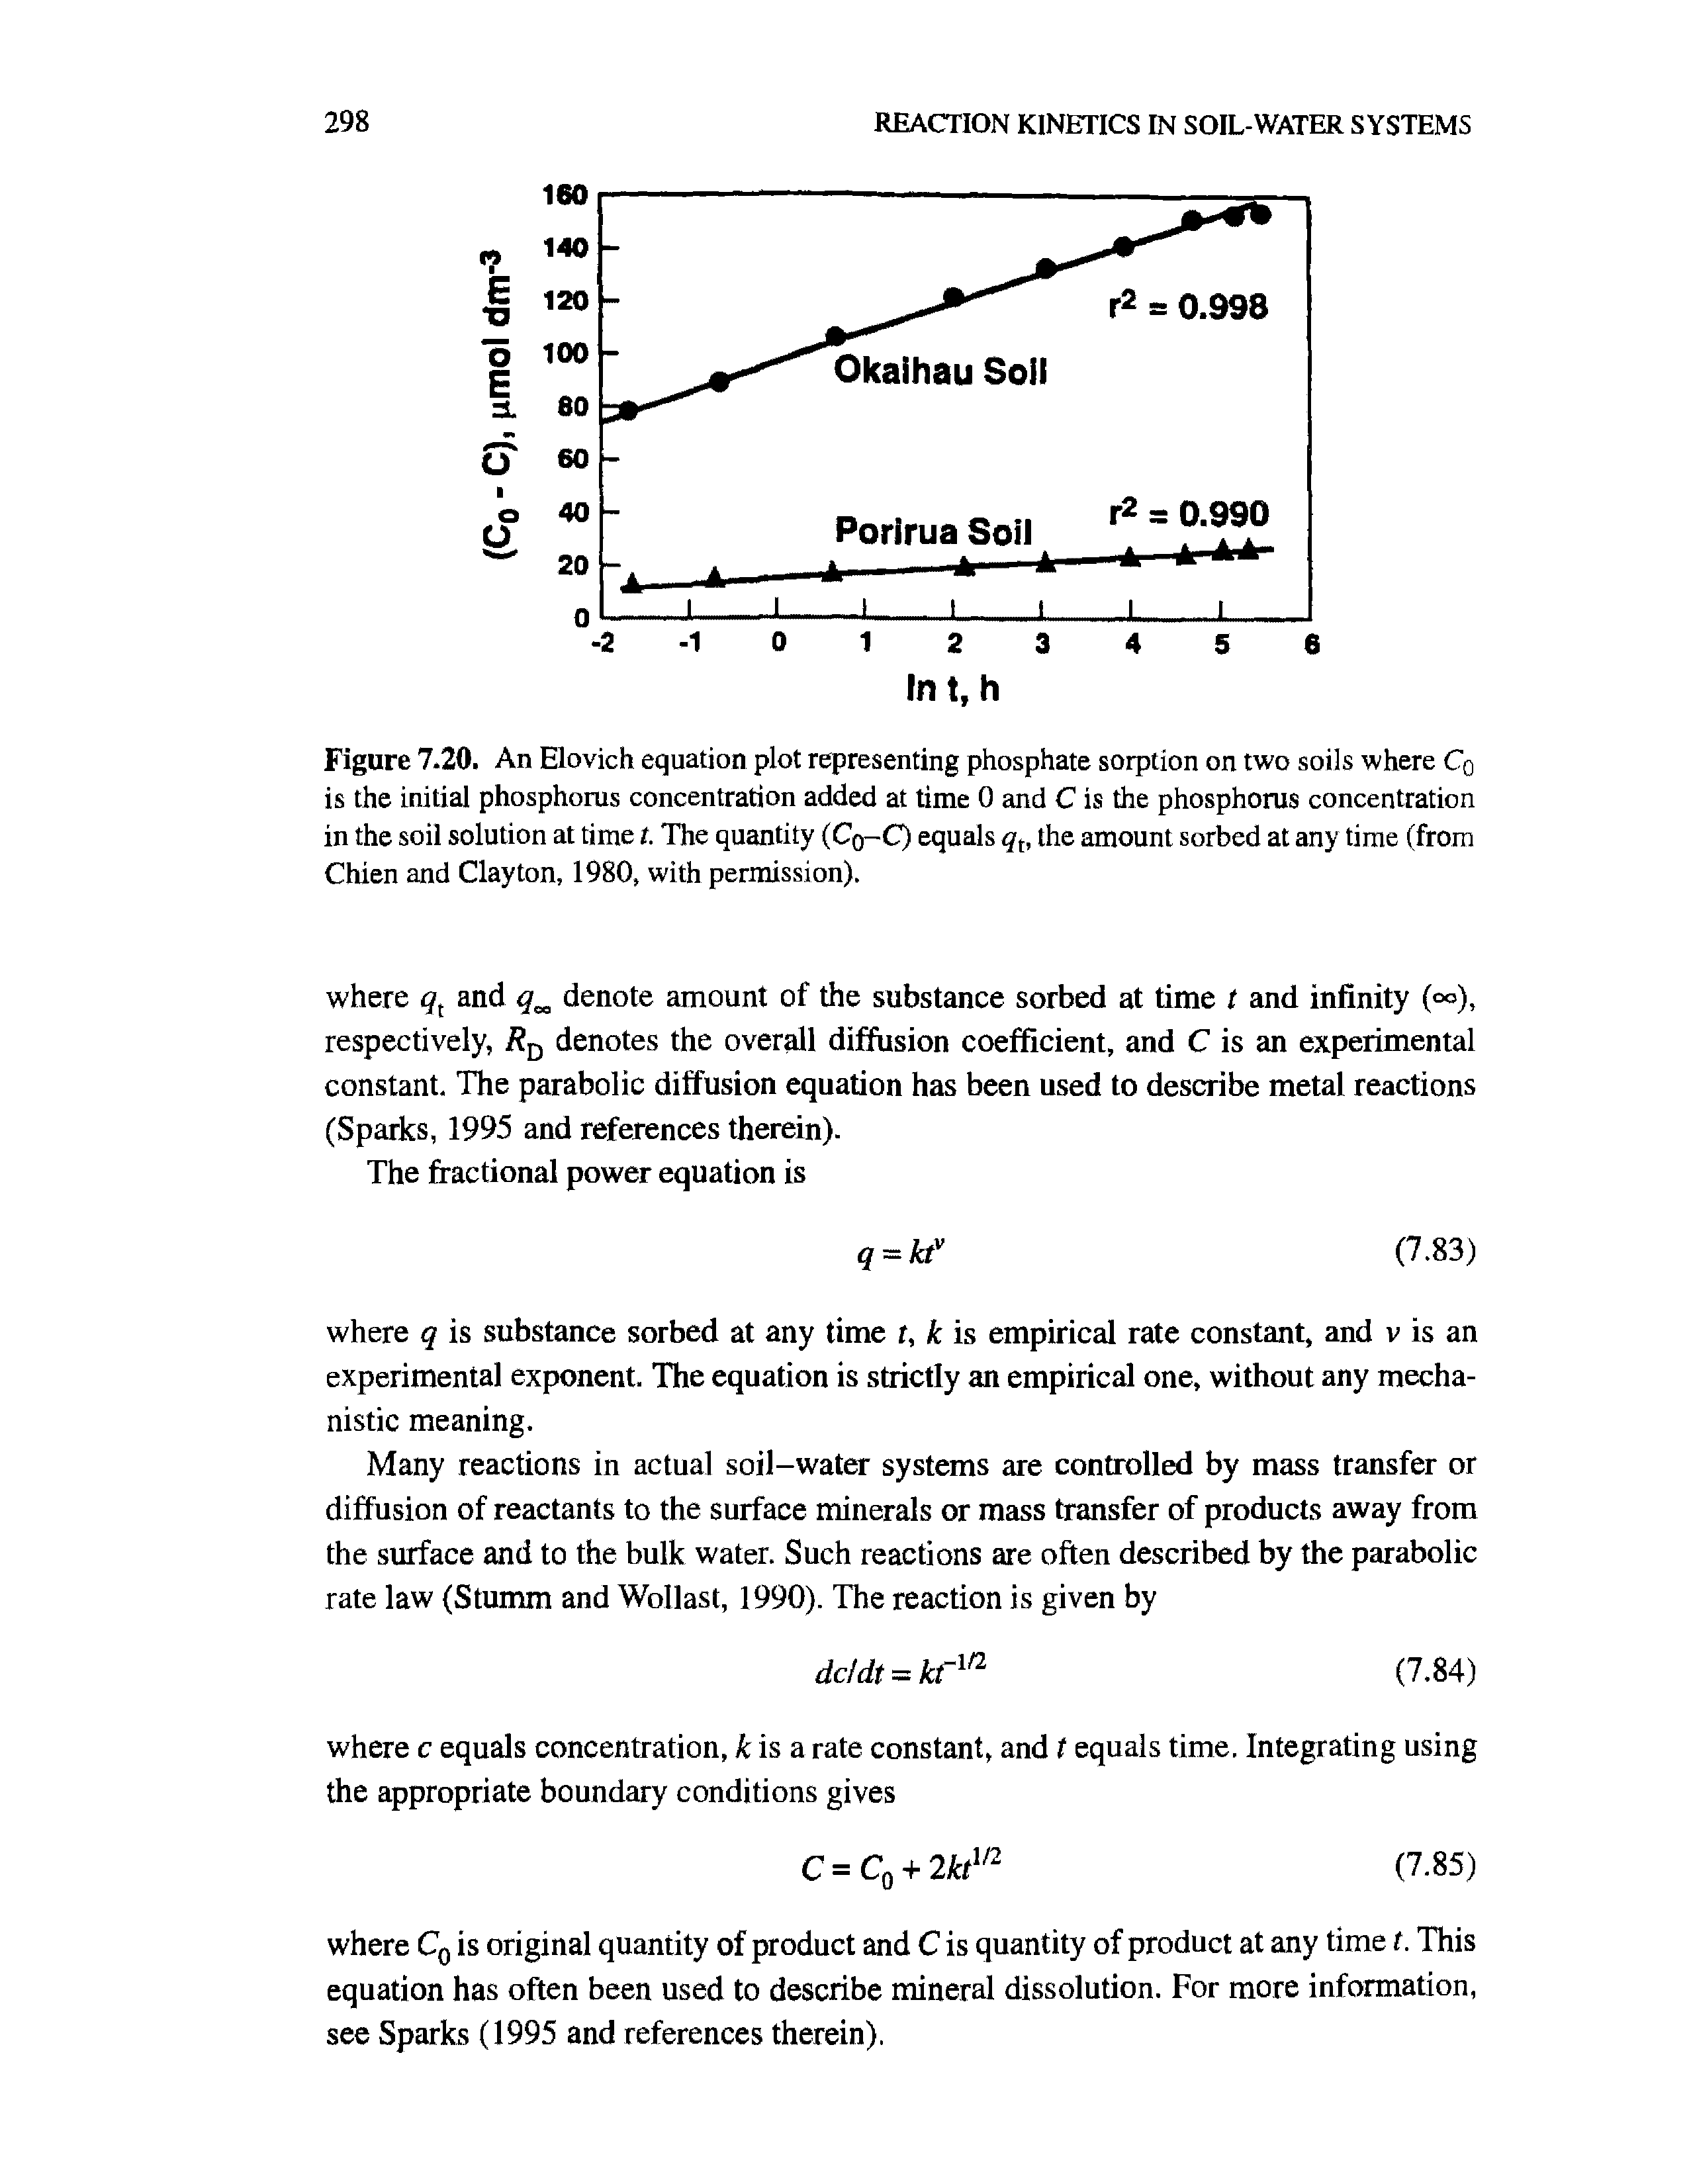 Figure 7.20. An Elovich equation plot representing phosphate sorption on two soils where Q is the initial phosphorus concentration added at time 0 and C is the phosphorus concentration in the soil solution at time t. The quantity (Cq-C) equals q, the amount sorbed at any time (from Chien and Clayton, 1980, with permission).